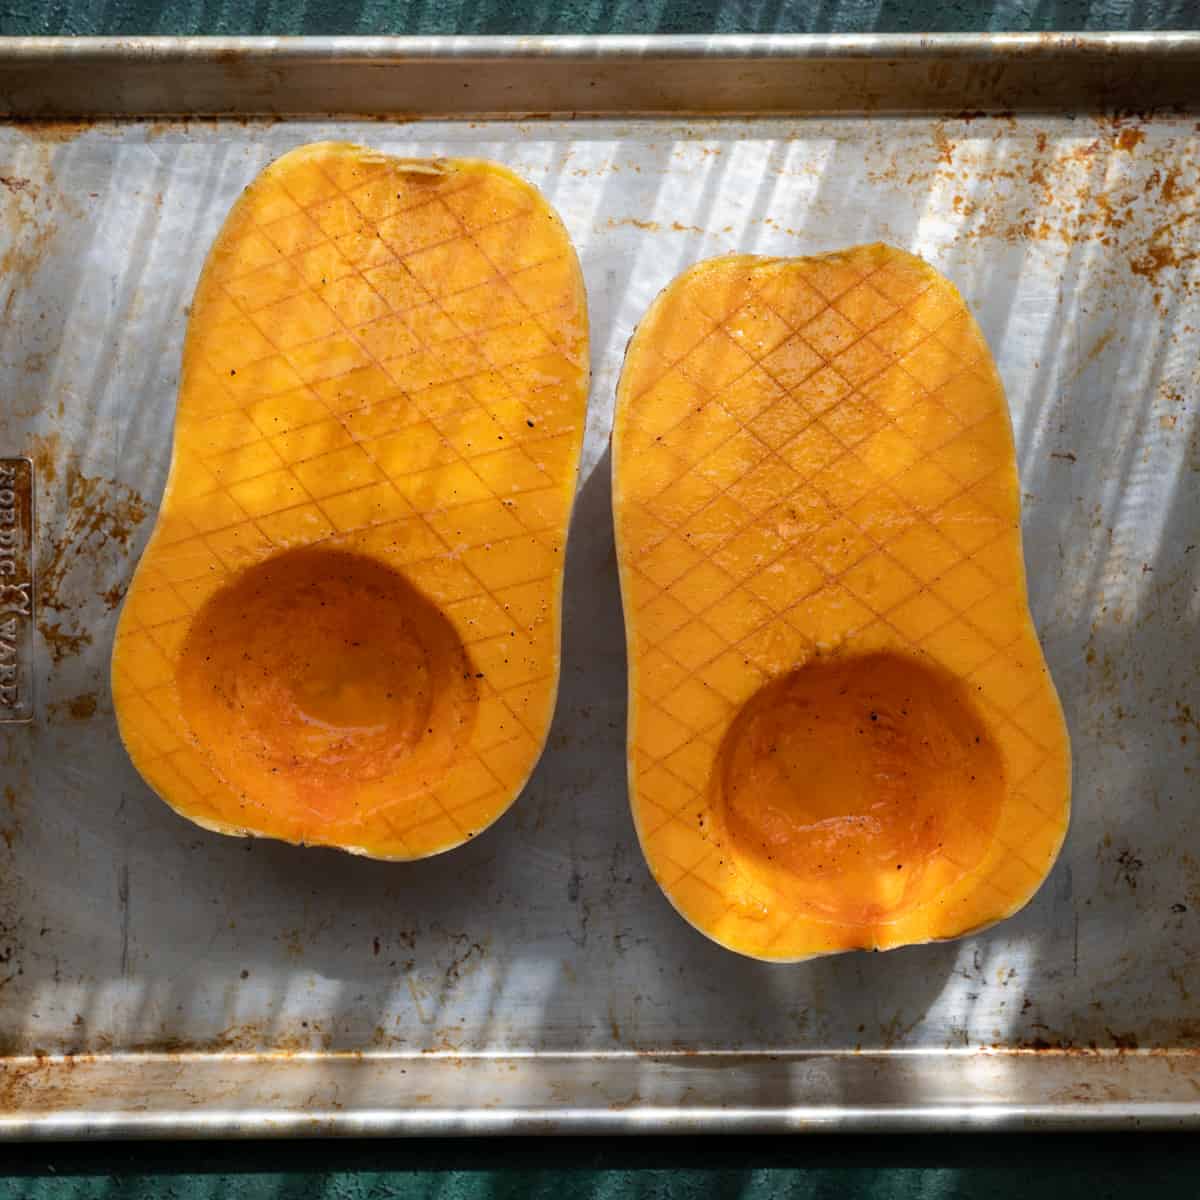 two large crosshatched butternut squash halves on a sheet pan, rubbed with olive oil.